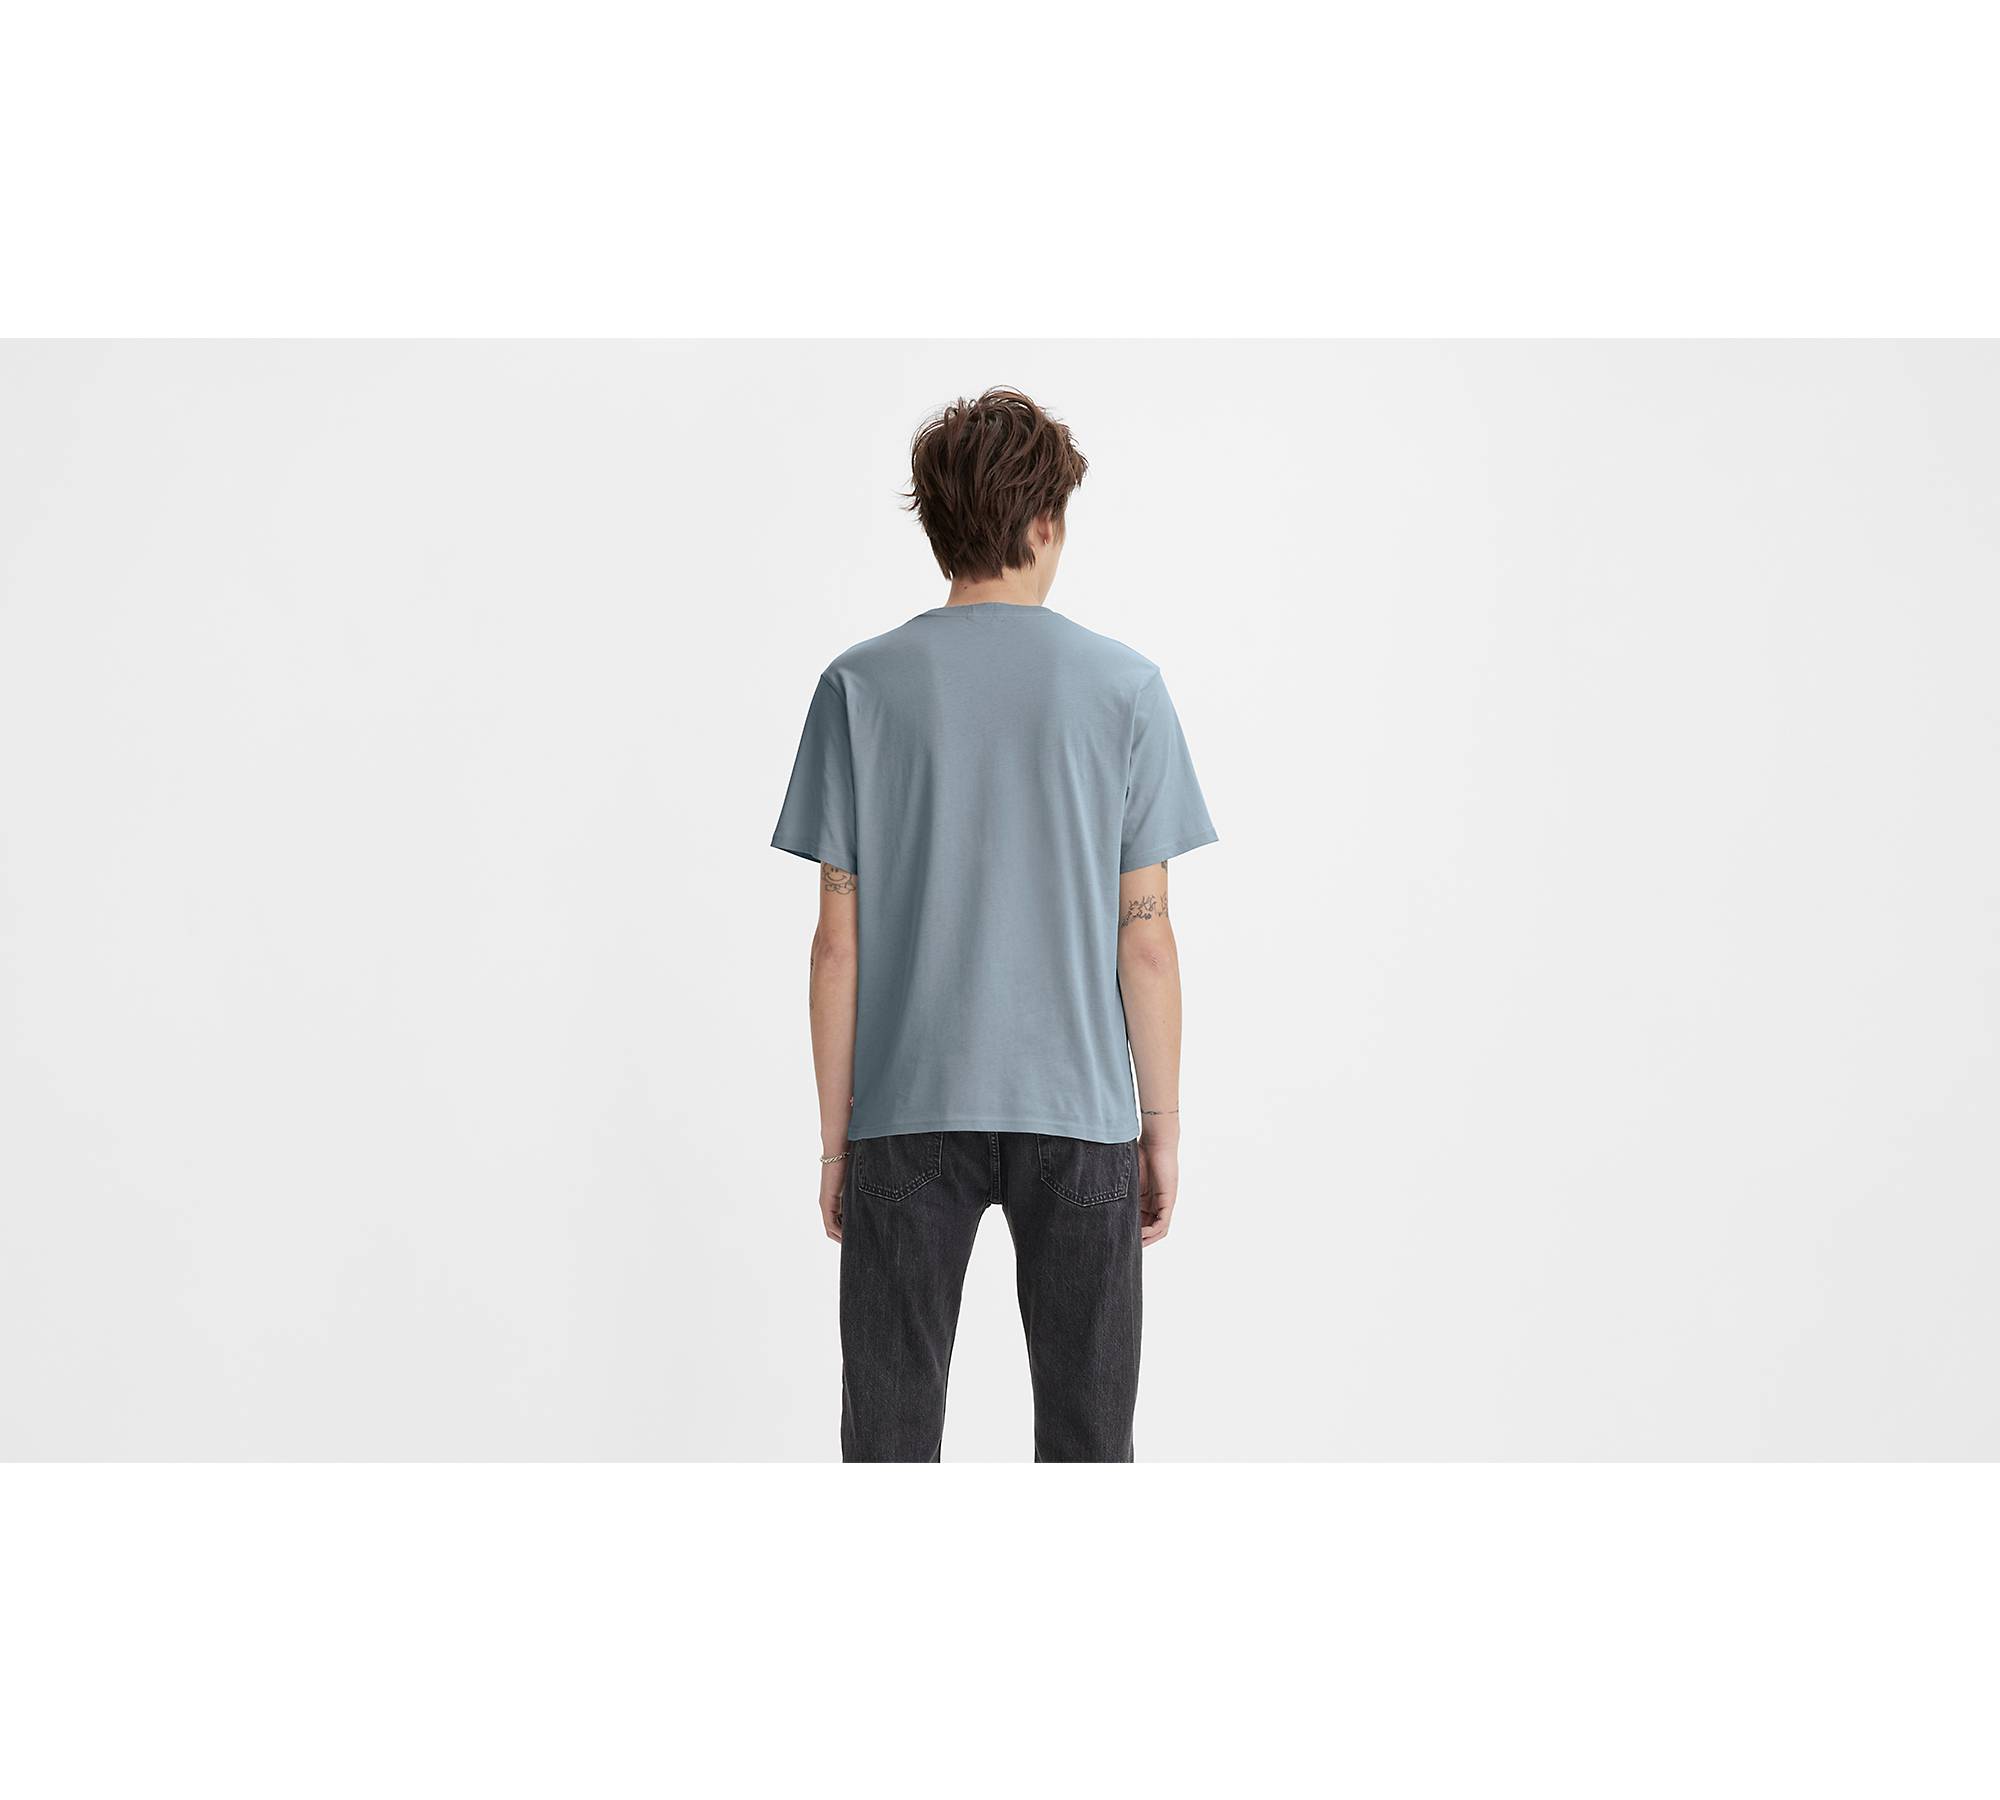 Grupo Lpoint® - Tshirt Levis Relaxed Fit Feather 16143-1298